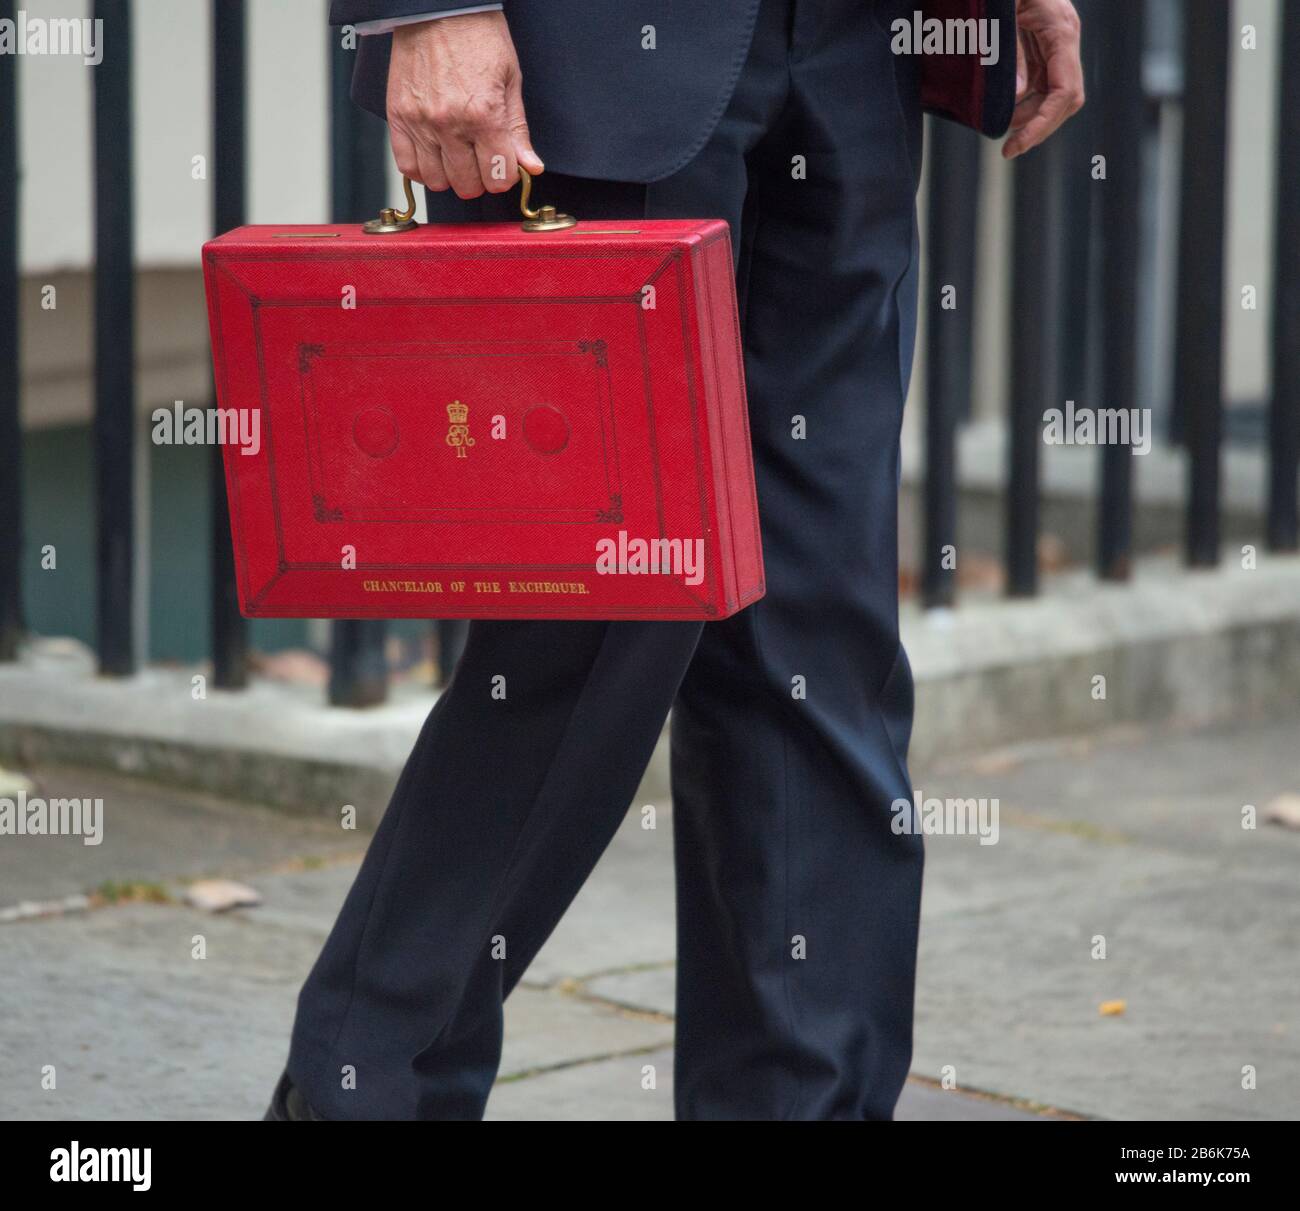 29th October 2018, London, UK. The Chancellor of the Exchequer leaves 11 Downing Street to present his red box to the assembled media. Stock Photo